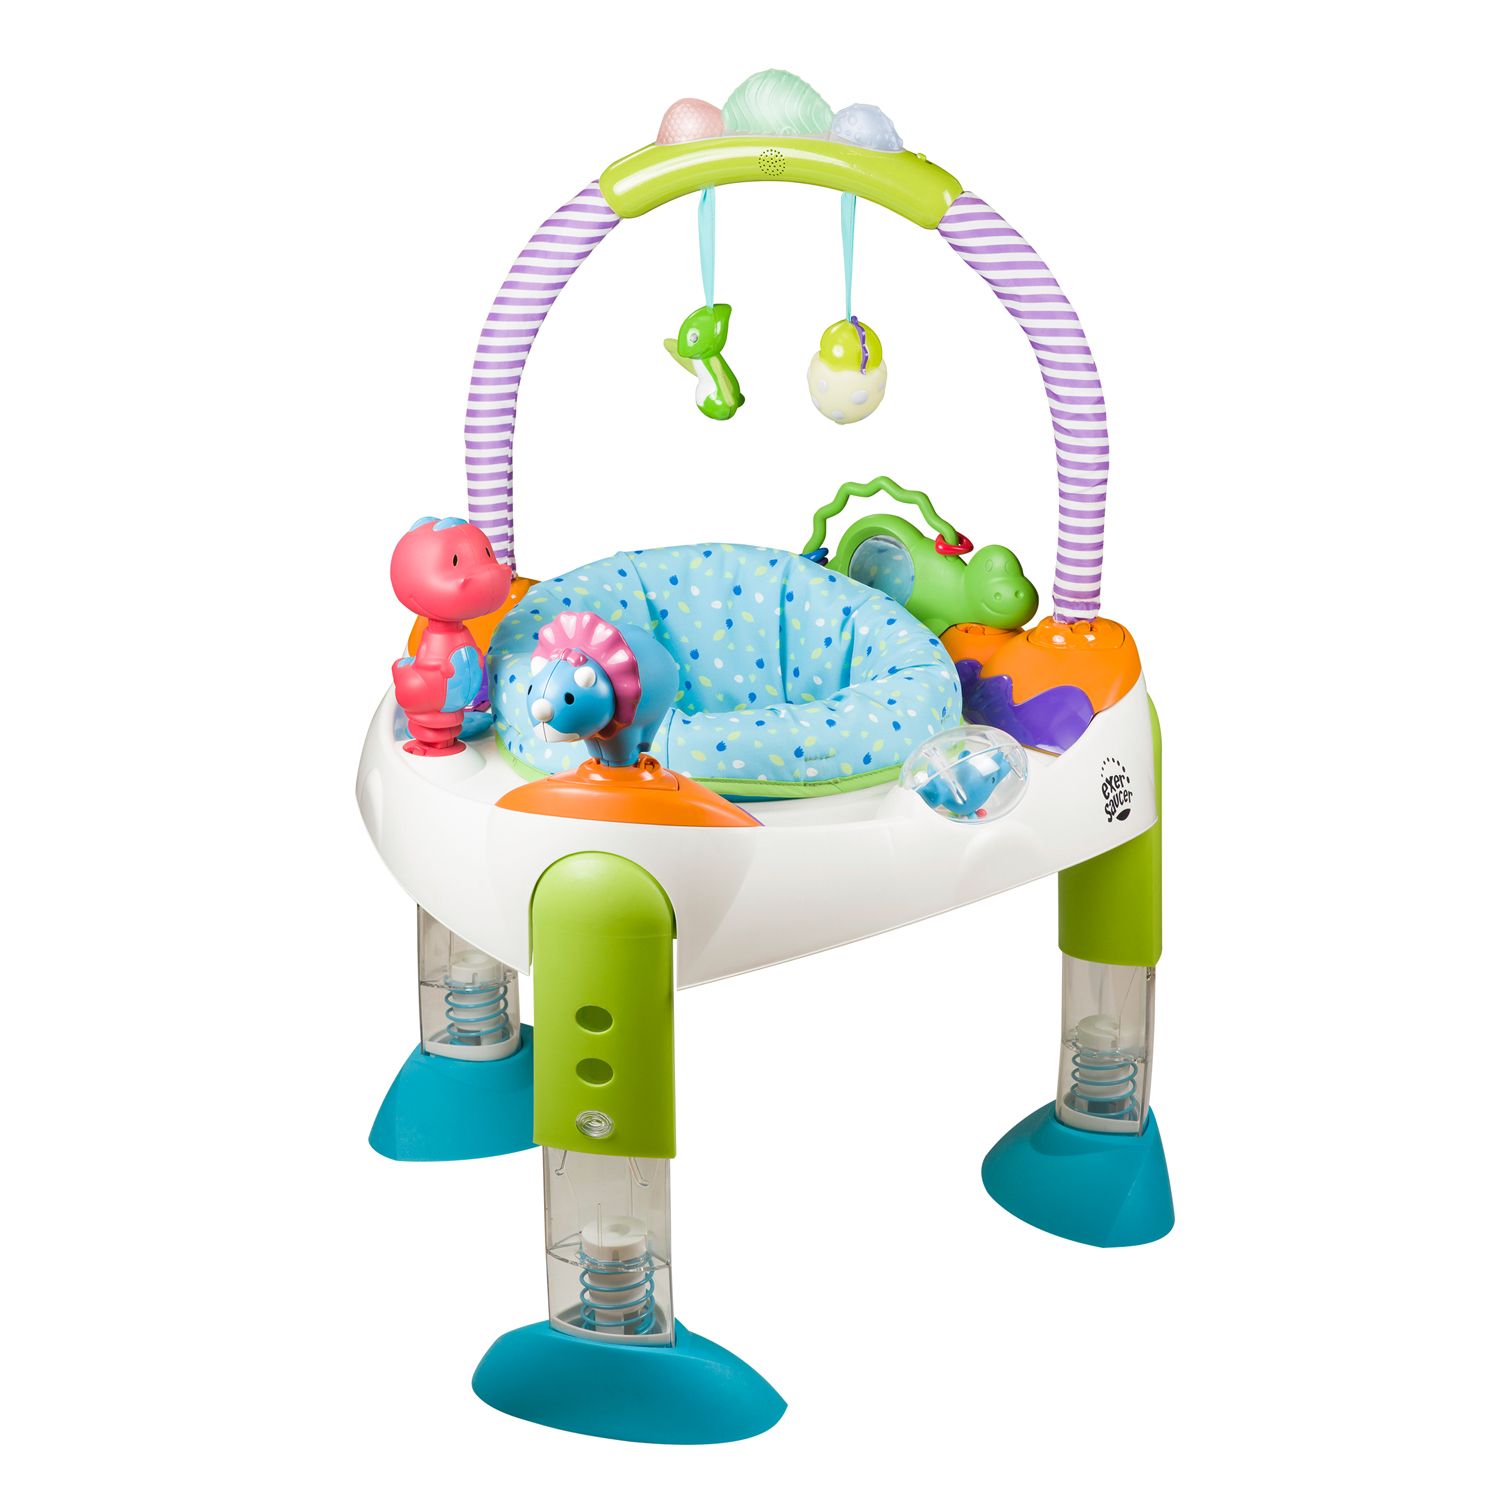 exersaucer activity table